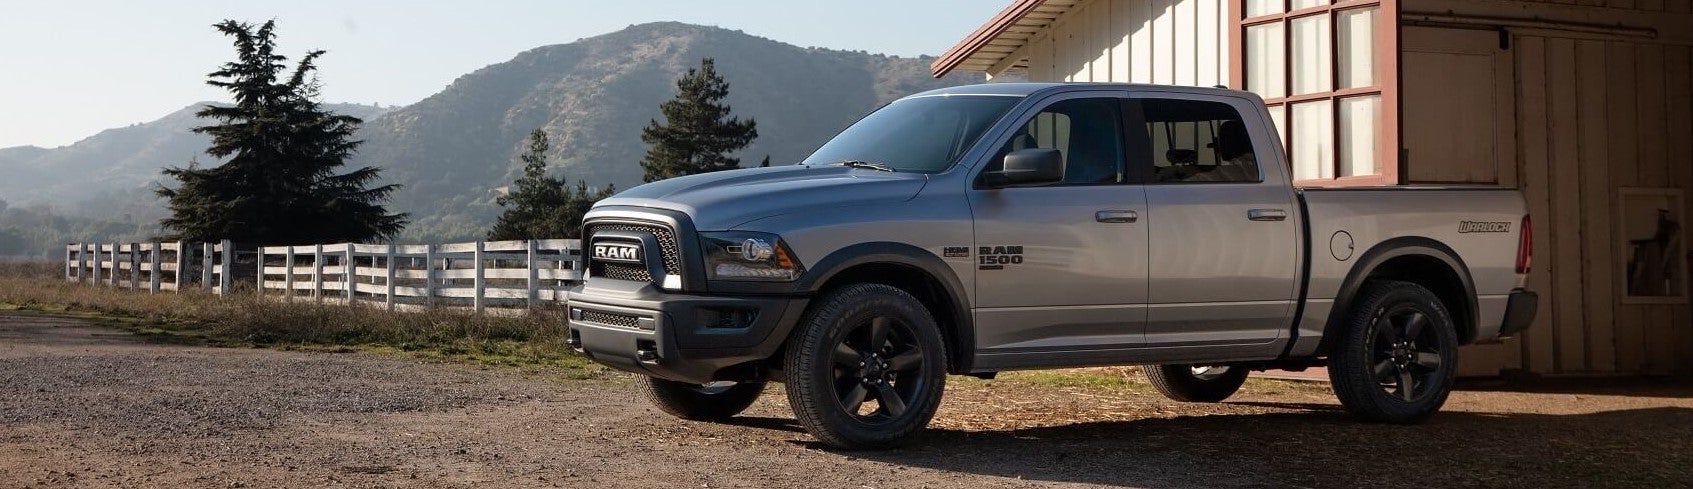 2021 Ram 1500 Review Franklin IN